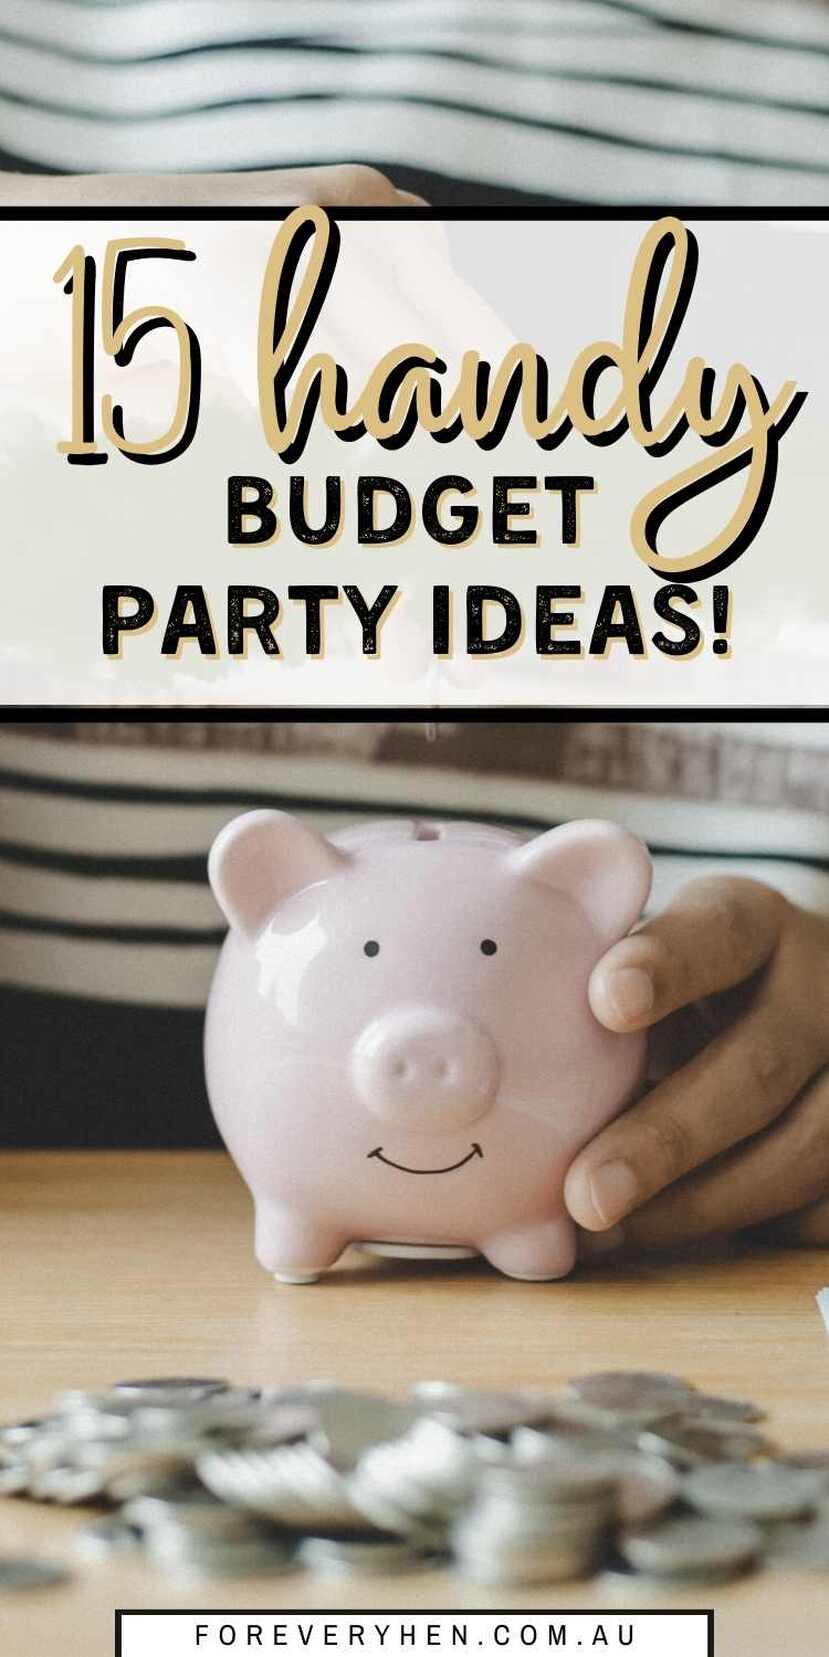 A person putting money into a piggy bank. Text overlay: 15 handy budget party ideas!